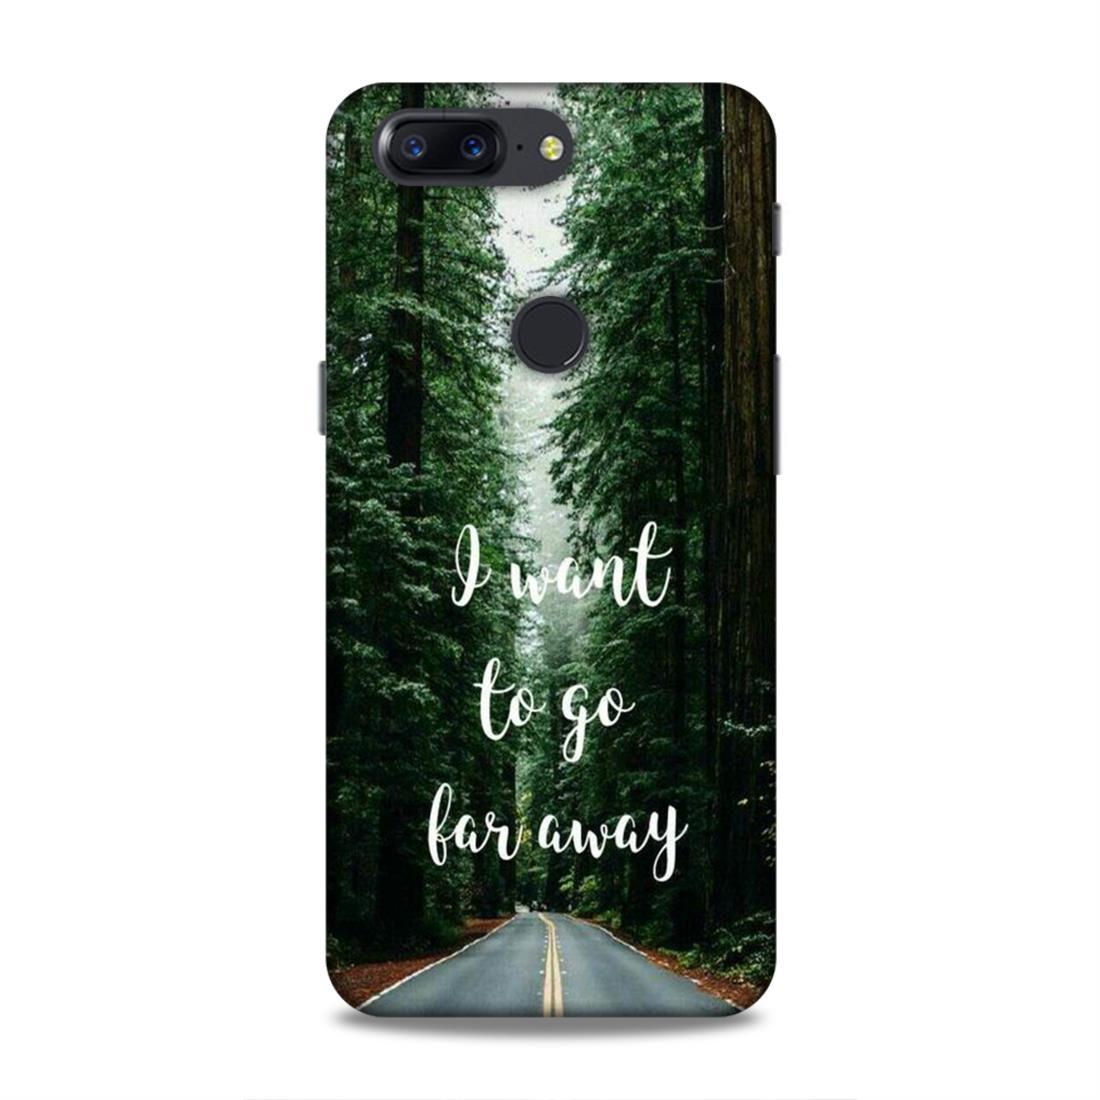 I Want To Go Far Away OnePlus 5T Phone Cover